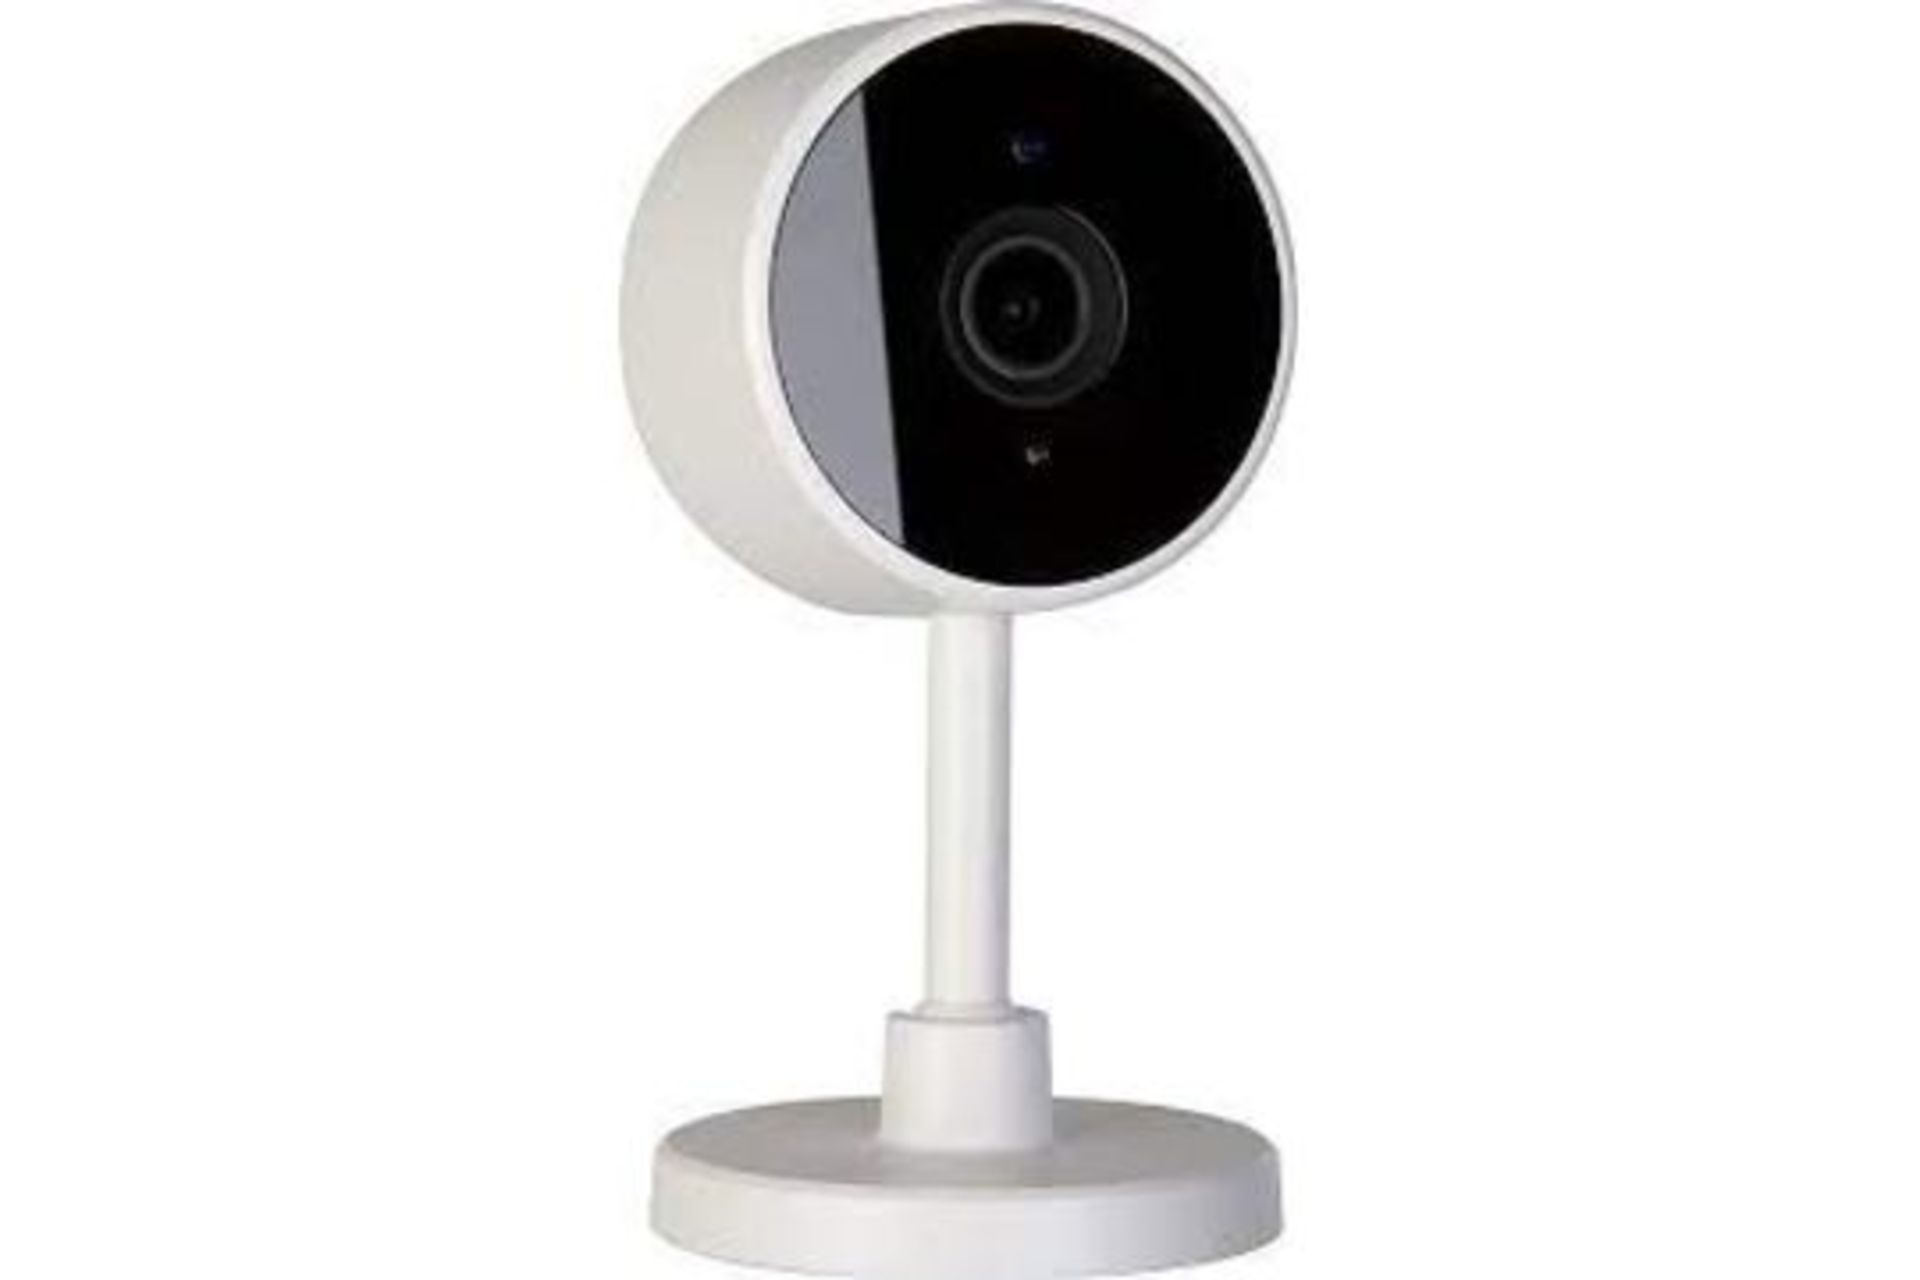 TCP Smart Indoor Wireless Full HD Night-Vision Security Camera - White - ER49